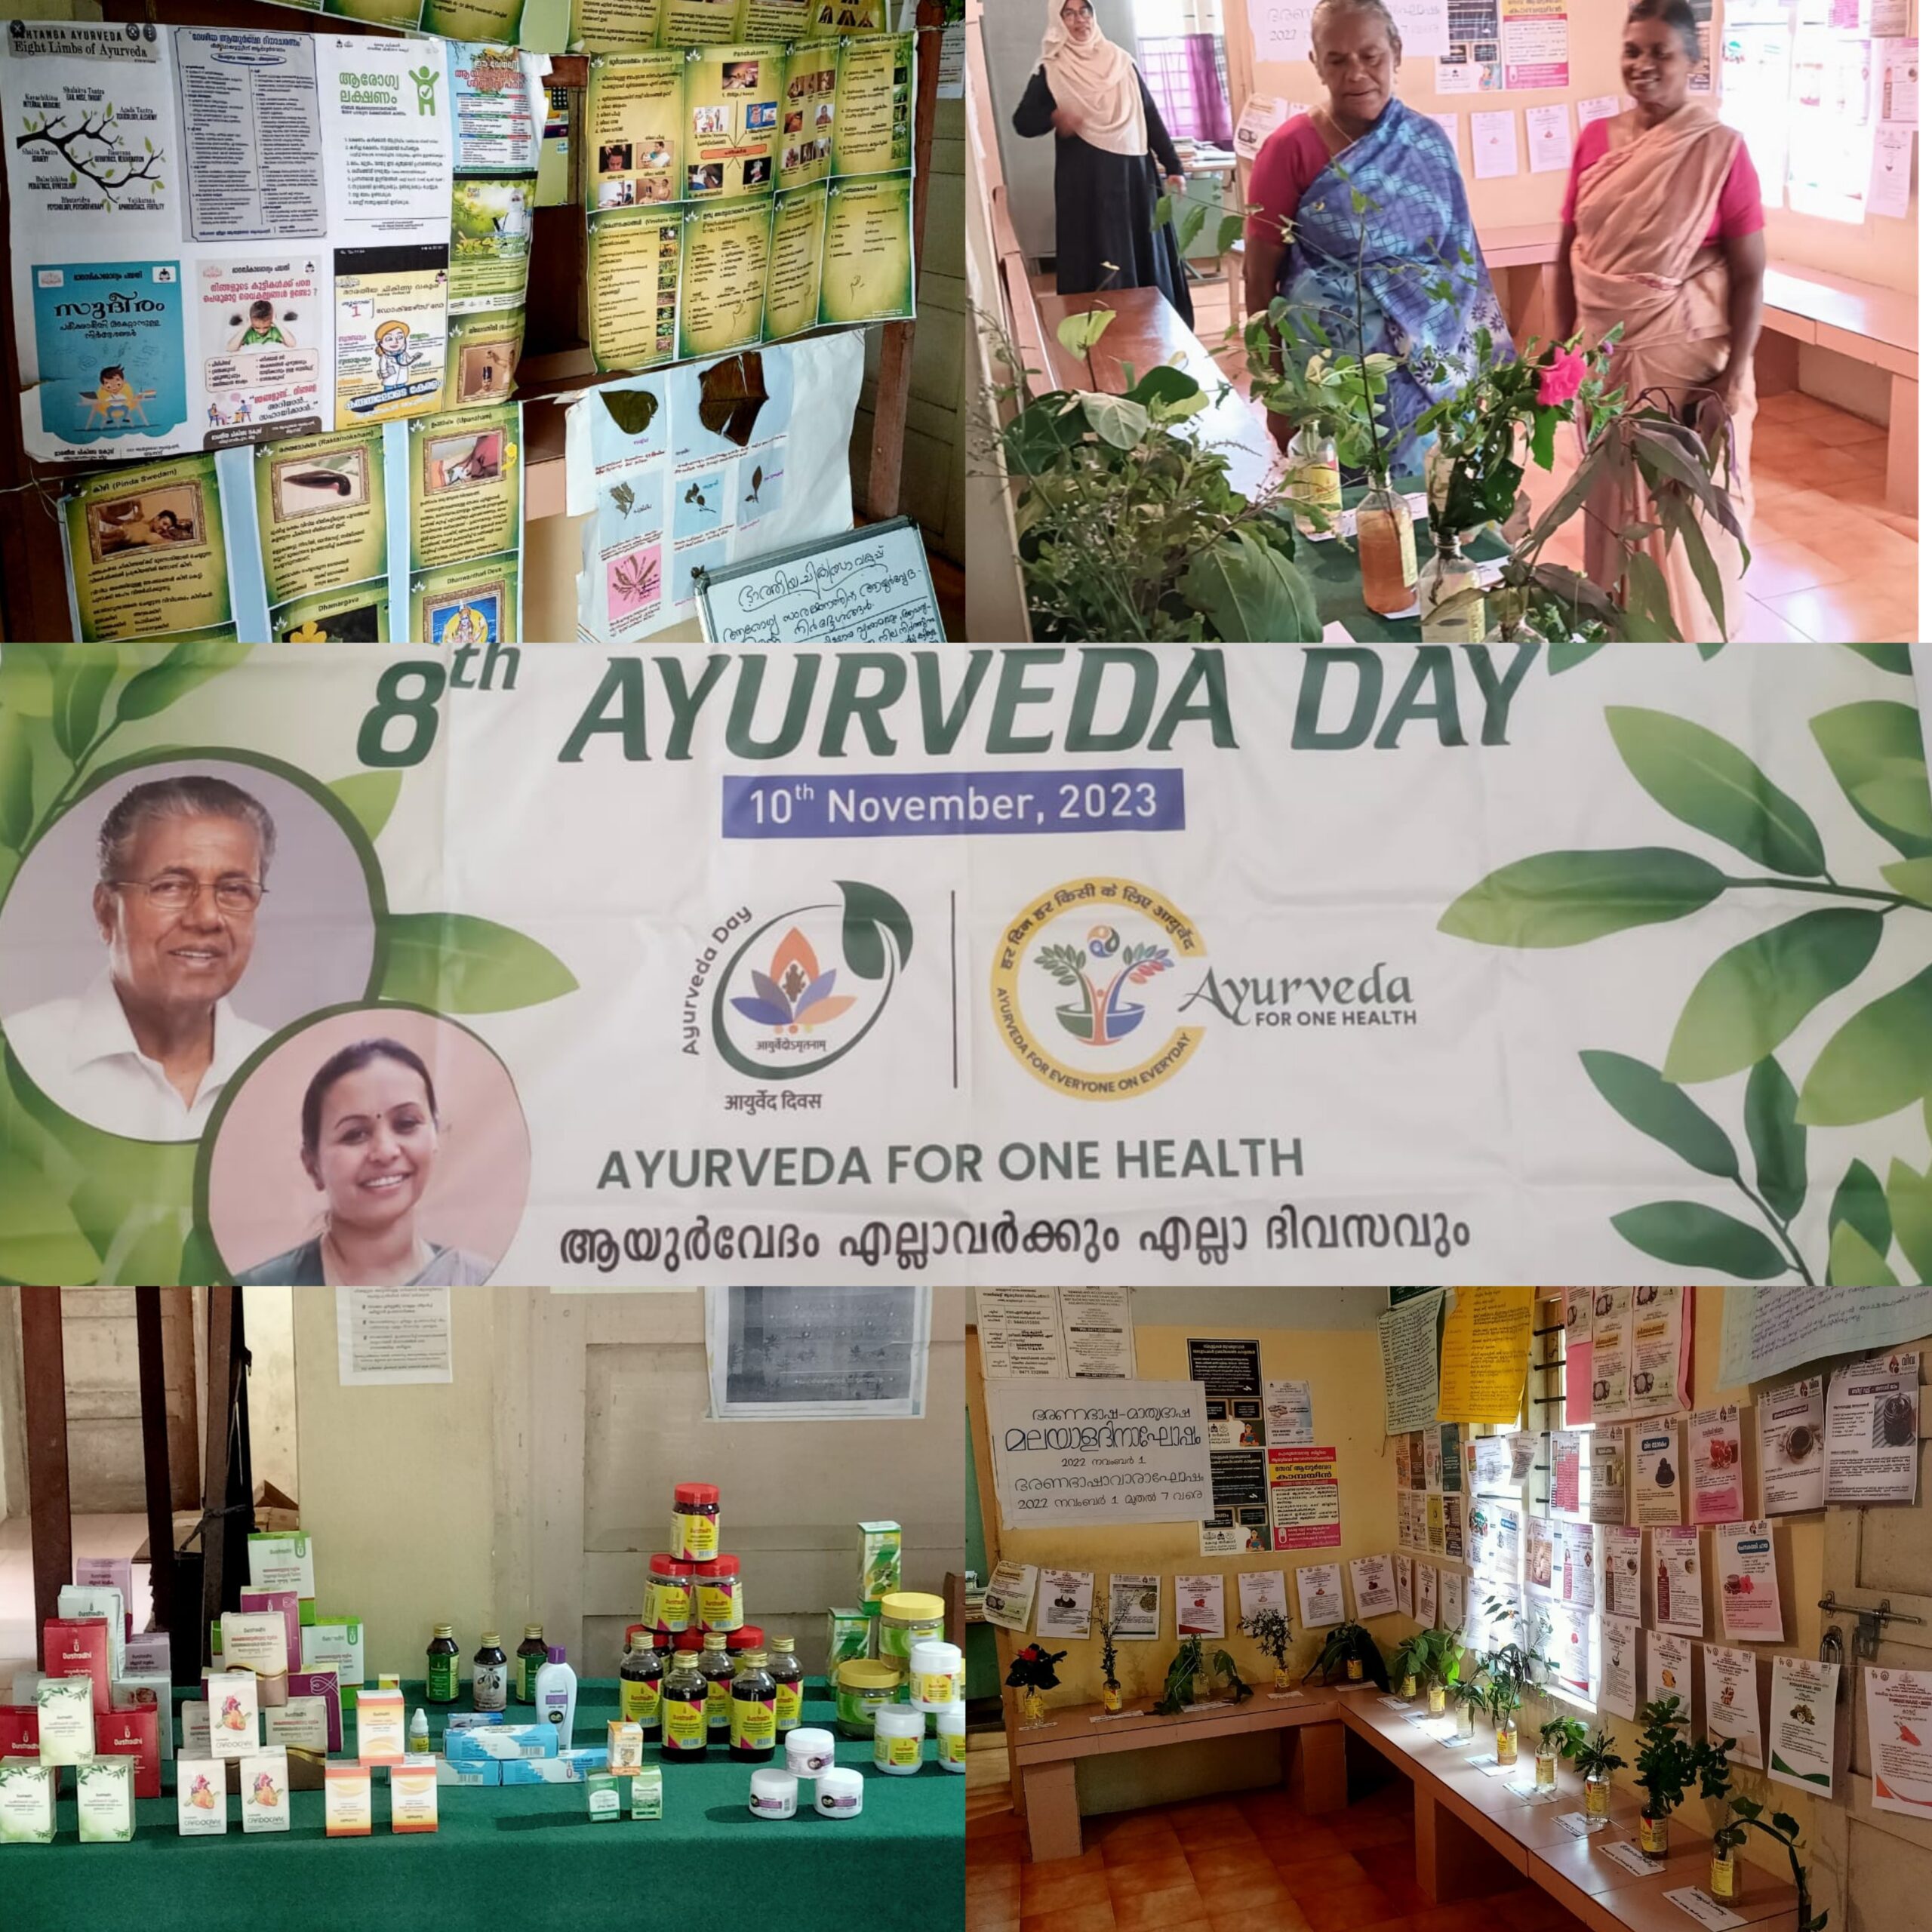 Exhibition of medicinal plants, posters on different nutritious food recipes, treatments and ayurveda medicines at GAD Changa.